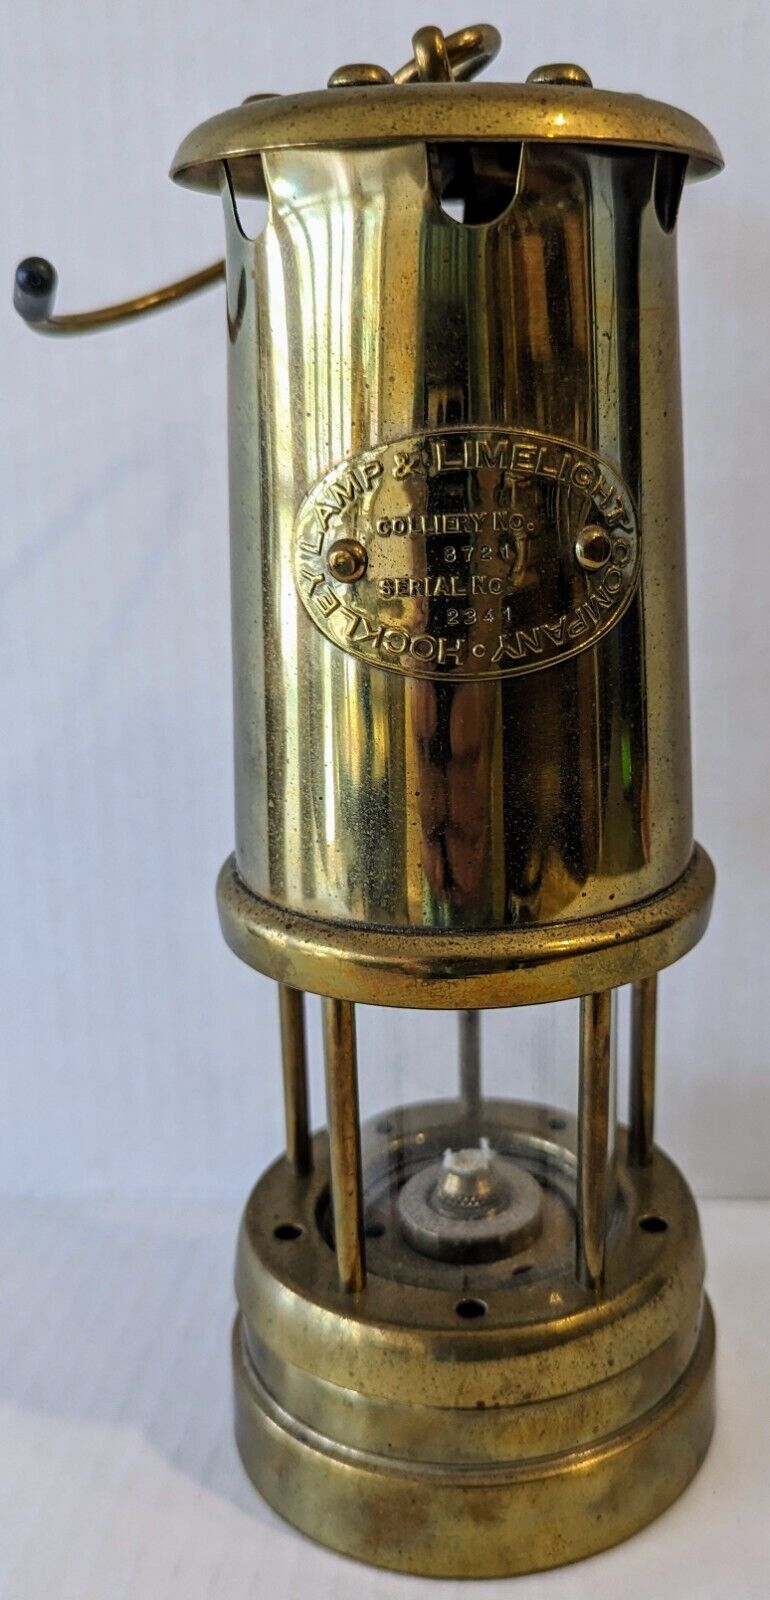 Vintage Brass Hockley Lamp & Limelight Company Miners Light Colliery Wales UK